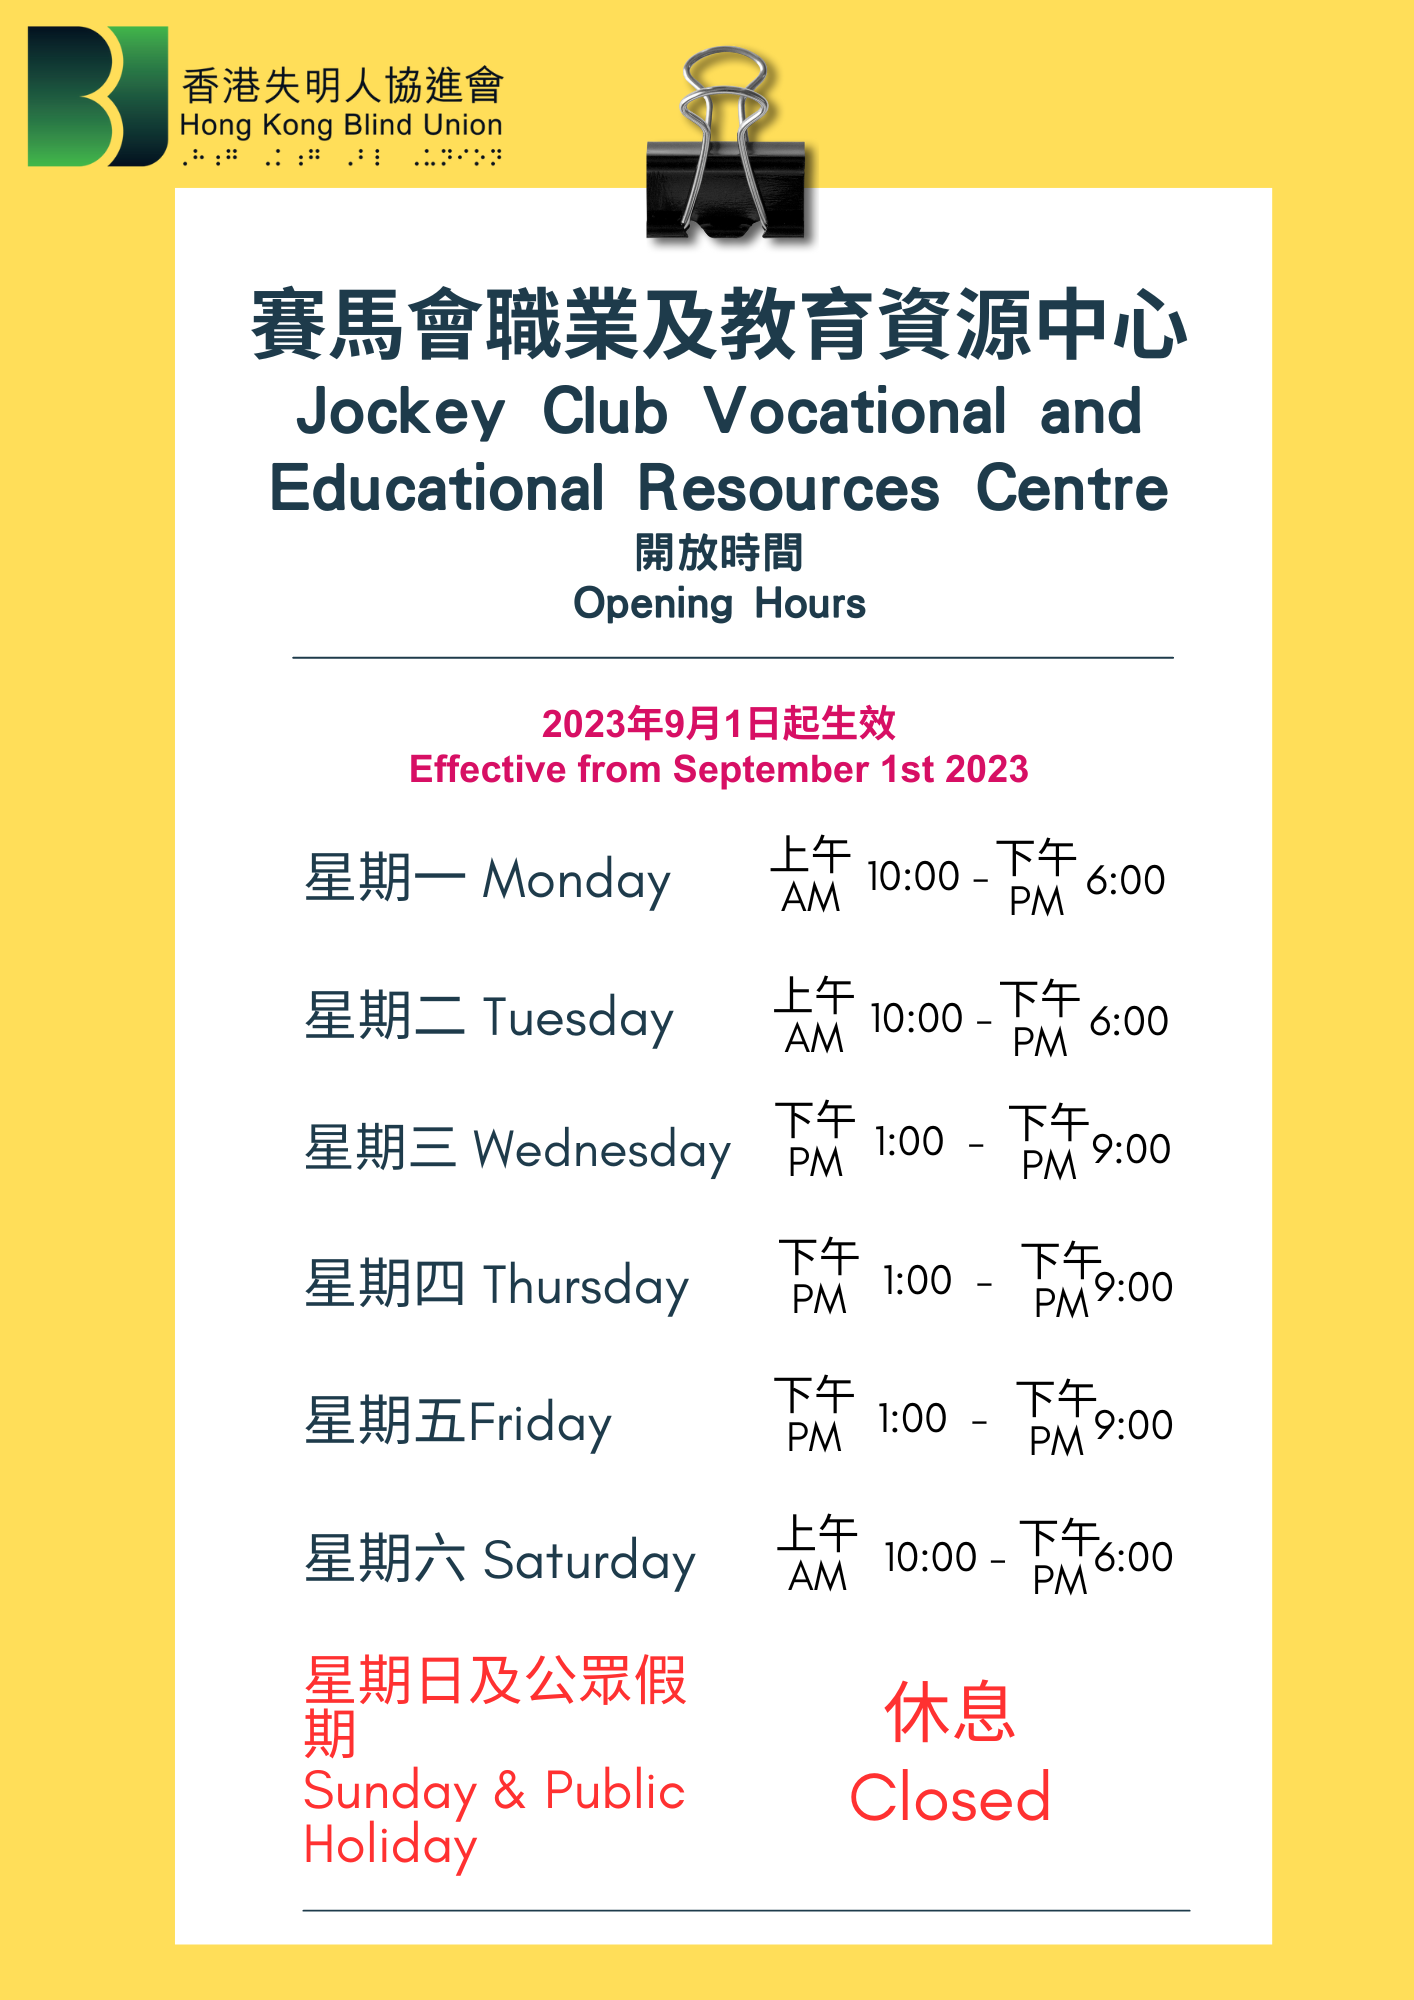 Opening Hours of Jockey Club Vocational and Educational Resources Centre will be changed from September 1, 2023.